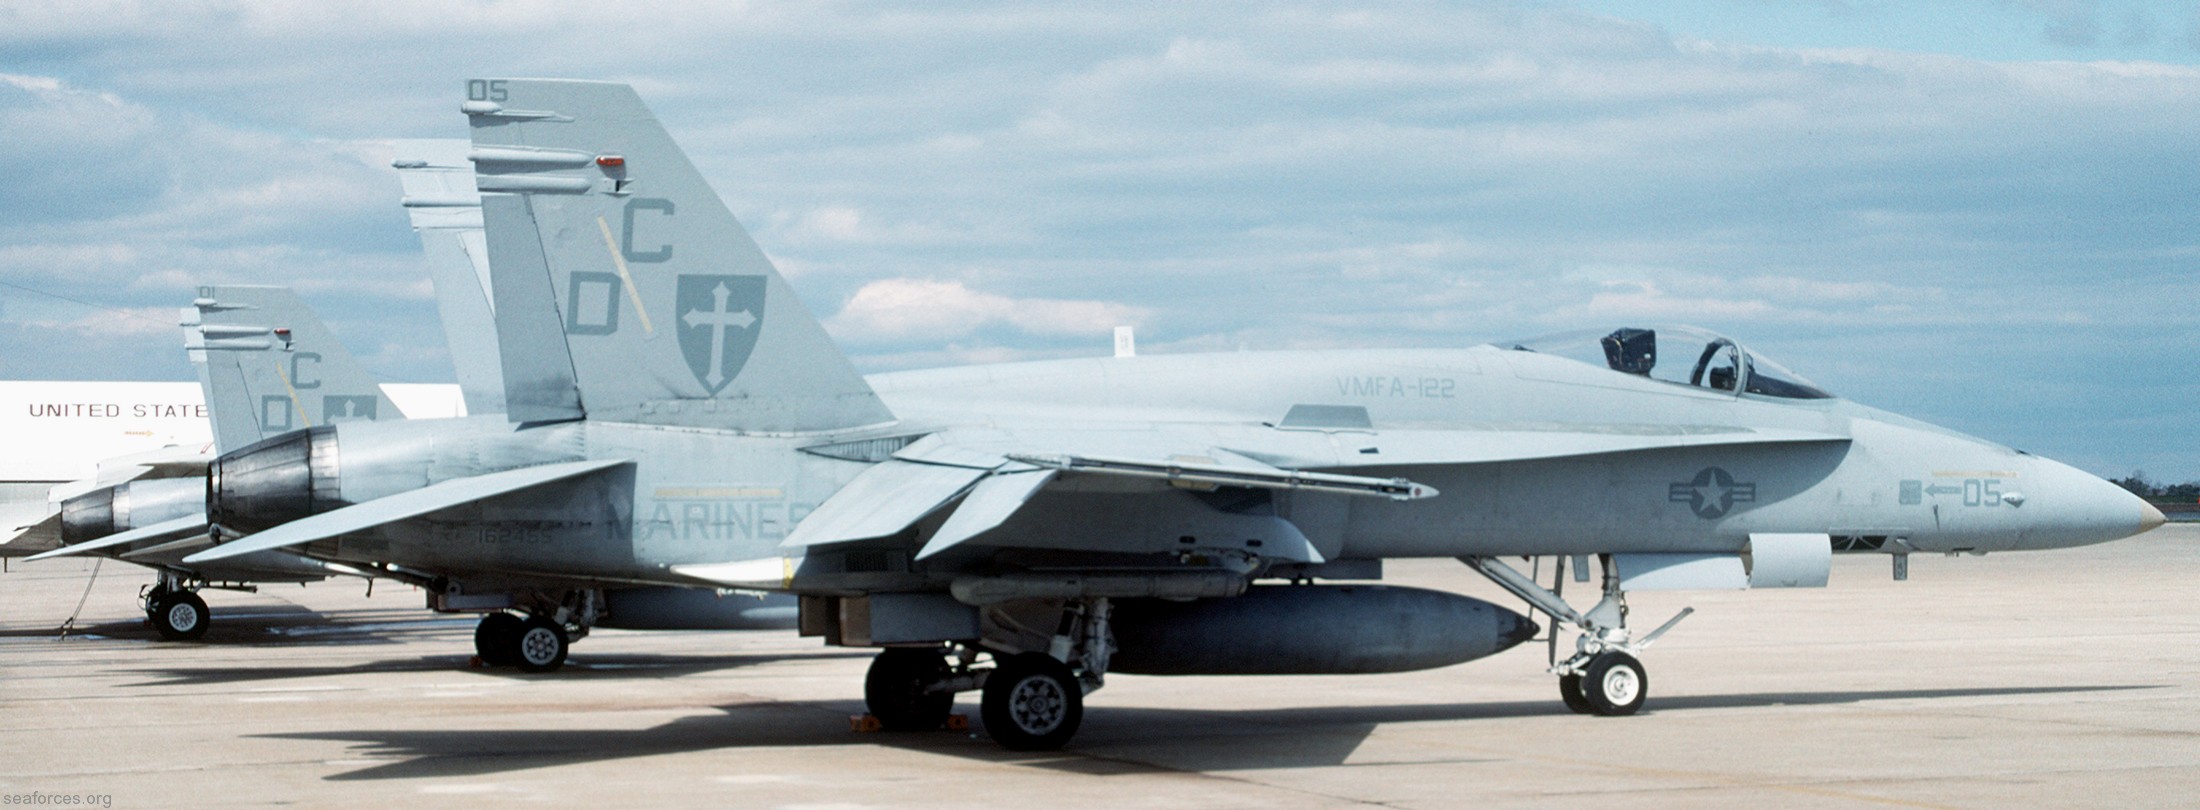 vmfa-122 crusaders f/a-18a hornet marine fighter attack squadron 70